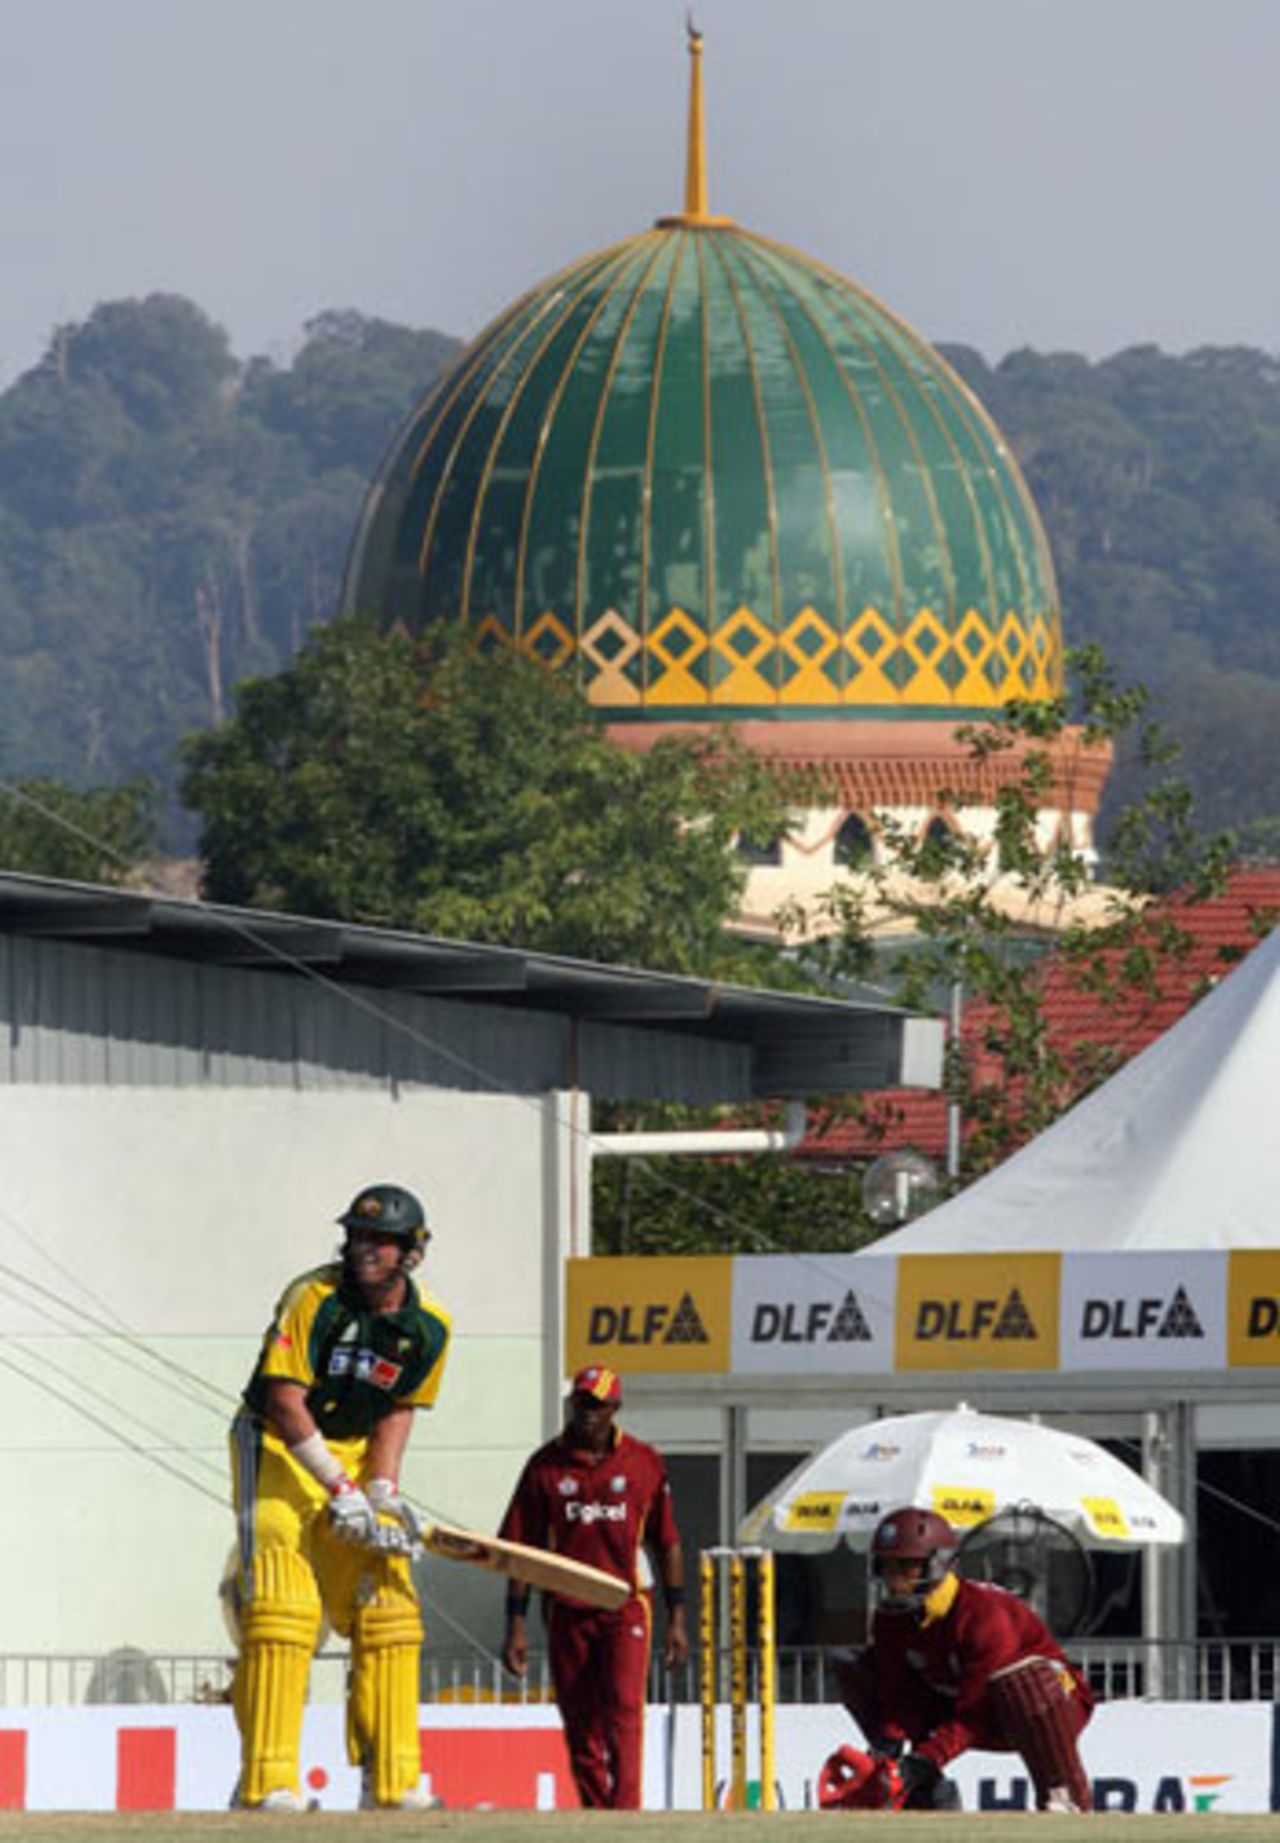 The mosque provides a picturesque backdrop as Michael Hussey takes guard, Australia v West Indies, DLF Cup, 4th match, September 18, 2006